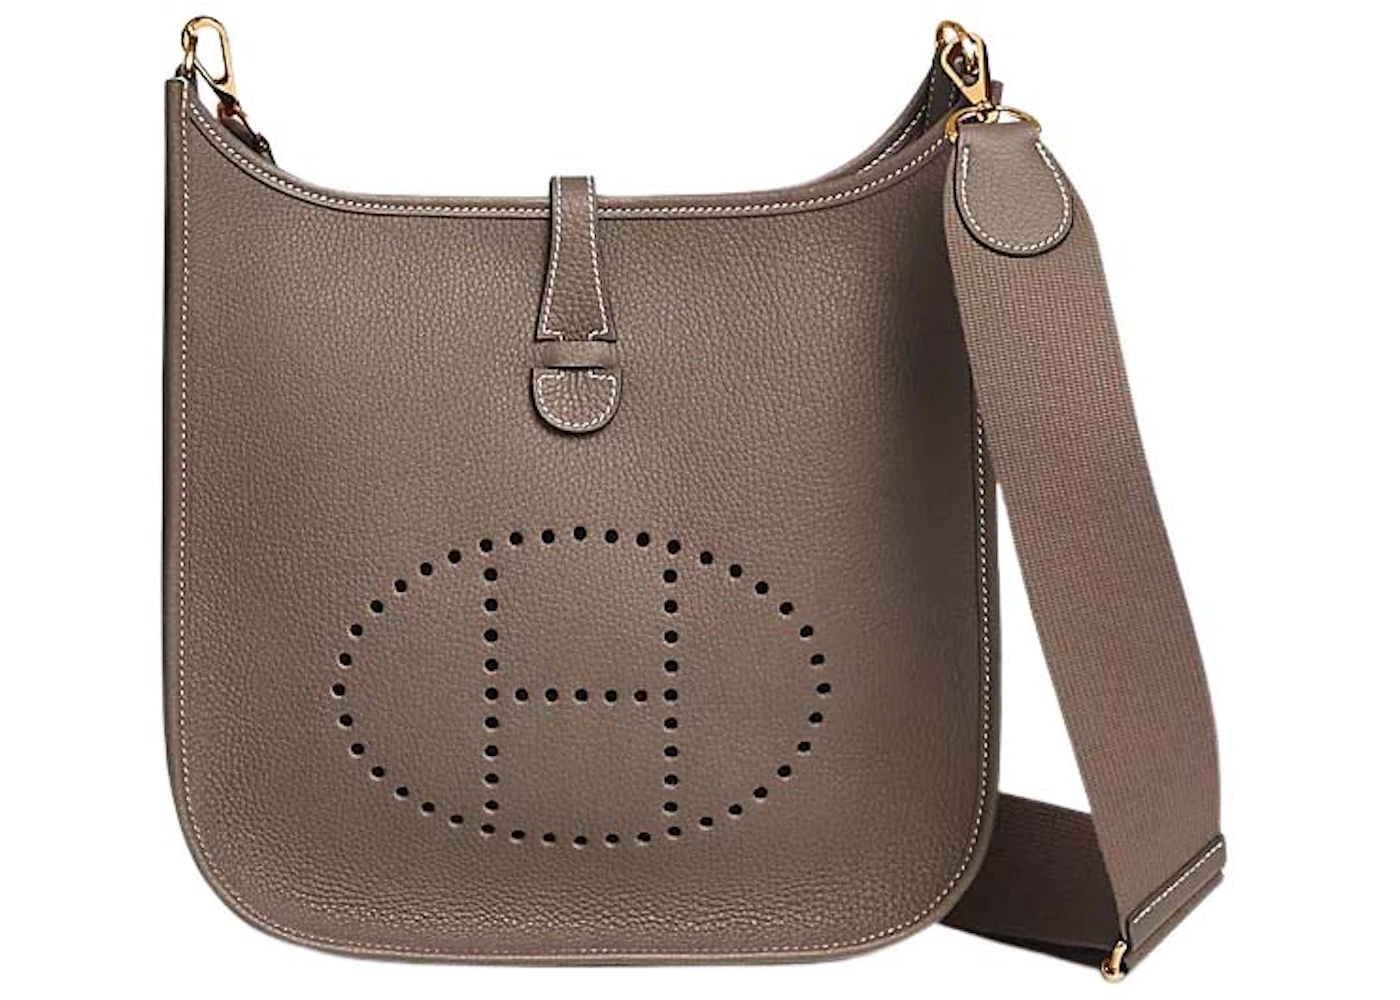 Hermes Black Taurillon Clemence Evelyne III 29 at Jill's Consignment